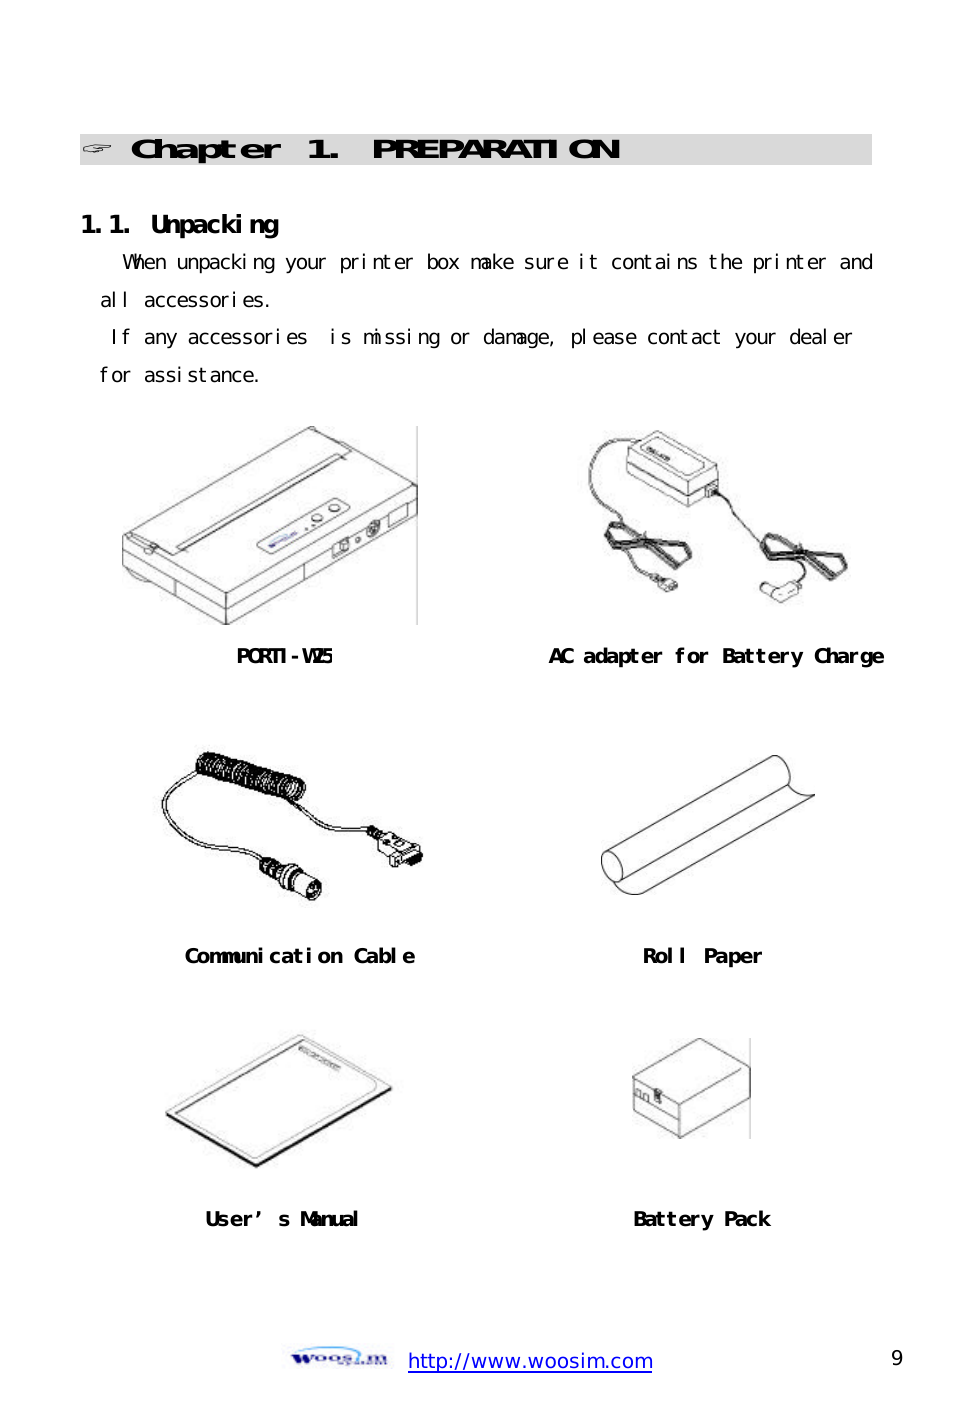  http://www.woosim.com 9                                ? Chapter 1. PREPARATION                               1.1. Unpacking  When unpacking your printer box make sure it contains the printer and all accessories.  If any accessories  is missing or damage, please contact your dealer for assistance.    PORTI-W25AC adapter for Battery ChargeCommunication Cable Roll PaperUser’s Manual Battery Pack